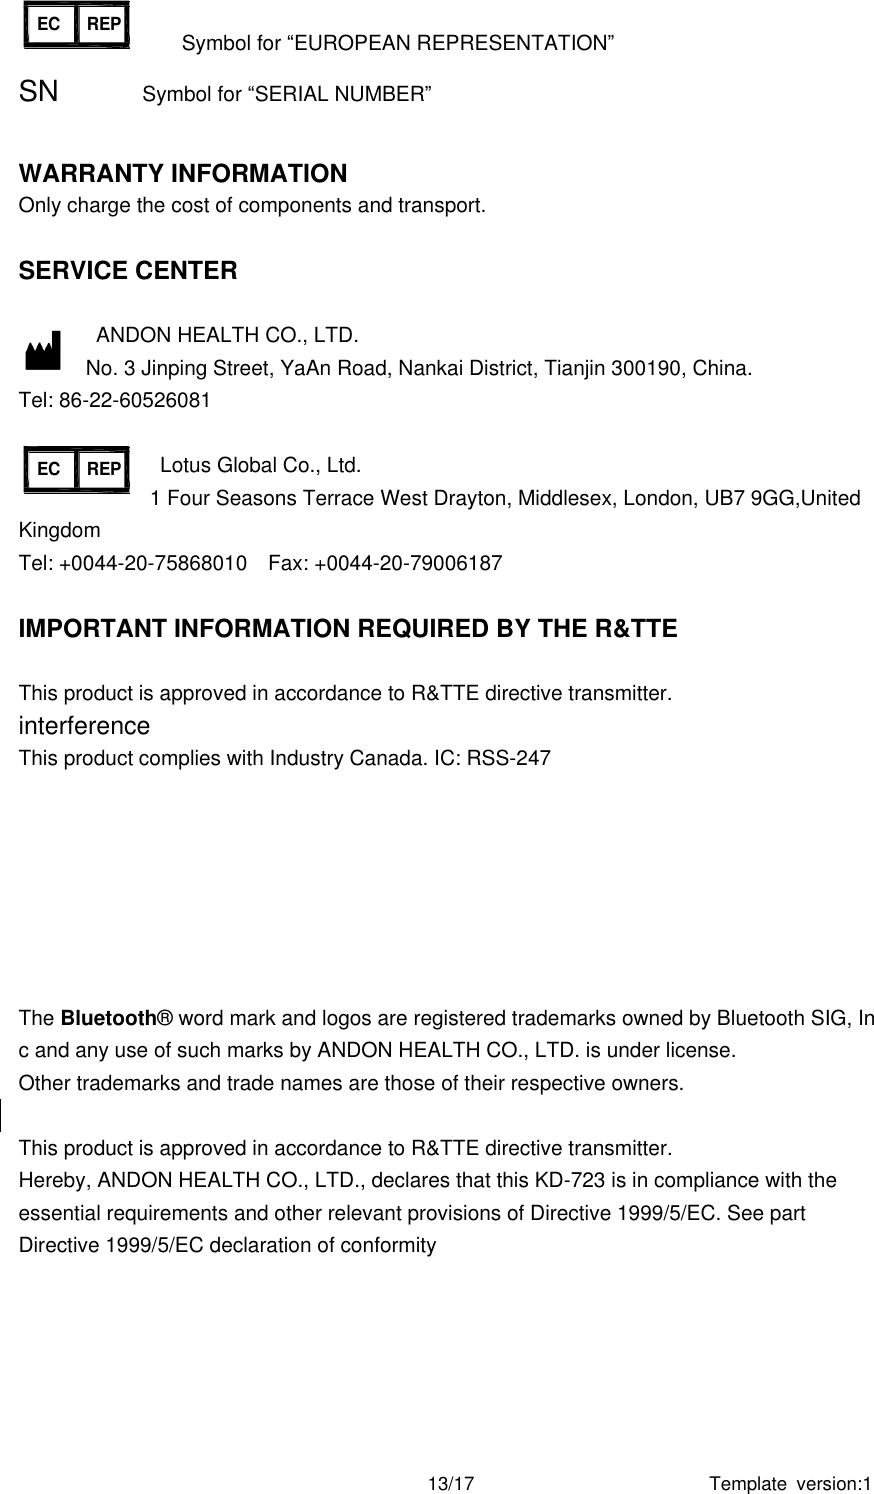 Template  version:1 13/17 NO. 31,Changjiang Road,Nankai District,Tianjin, P.R.ChinaEC REPANDON Health Co.,LtdAUTOMATIC BLOOD PRESSURE MONITORMODEL: KD-59076V     SN:R0197Lotus Global Co.,Ltd 47 Spenlow House Bermondsey London SE16 4SJ              Symbol for “EUROPEAN REPRESENTATION” SN                Symbol for “SERIAL NUMBER”  WARRANTY INFORMATION Only charge the cost of components and transport.    SERVICE CENTER    ANDON HEALTH CO., LTD. No. 3 Jinping Street, YaAn Road, Nankai District, Tianjin 300190, China. Tel: 86-22-60526081              Lotus Global Co., Ltd.   1 Four Seasons Terrace West Drayton, Middlesex, London, UB7 9GG,United Kingdom  Tel: +0044-20-75868010    Fax: +0044-20-79006187  IMPORTANT INFORMATION REQUIRED BY THE R&amp;TTE  This product is approved in accordance to R&amp;TTE directive transmitter. interference This product complies with Industry Canada. IC: RSS-247 The Bluetooth®  word mark and logos are registered trademarks owned by Bluetooth SIG, Inc and any use of such marks by ANDON HEALTH CO., LTD. is under license. Other trademarks and trade names are those of their respective owners.  This product is approved in accordance to R&amp;TTE directive transmitter. Hereby, ANDON HEALTH CO., LTD., declares that this KD-723 is in compliance with the essential requirements and other relevant provisions of Directive 1999/5/EC. See part Directive 1999/5/EC declaration of conformity     NO. 31,Changjiang Road,Nankai District,Tianjin, P.R.ChinaEC REPANDON Health Co.,LtdAUTOMATIC BLOOD PRESSURE MONITORMODEL: KD-59076V     SN:R0197Lotus Global Co.,Ltd 47 Spenlow House Bermondsey London SE16 4SJ